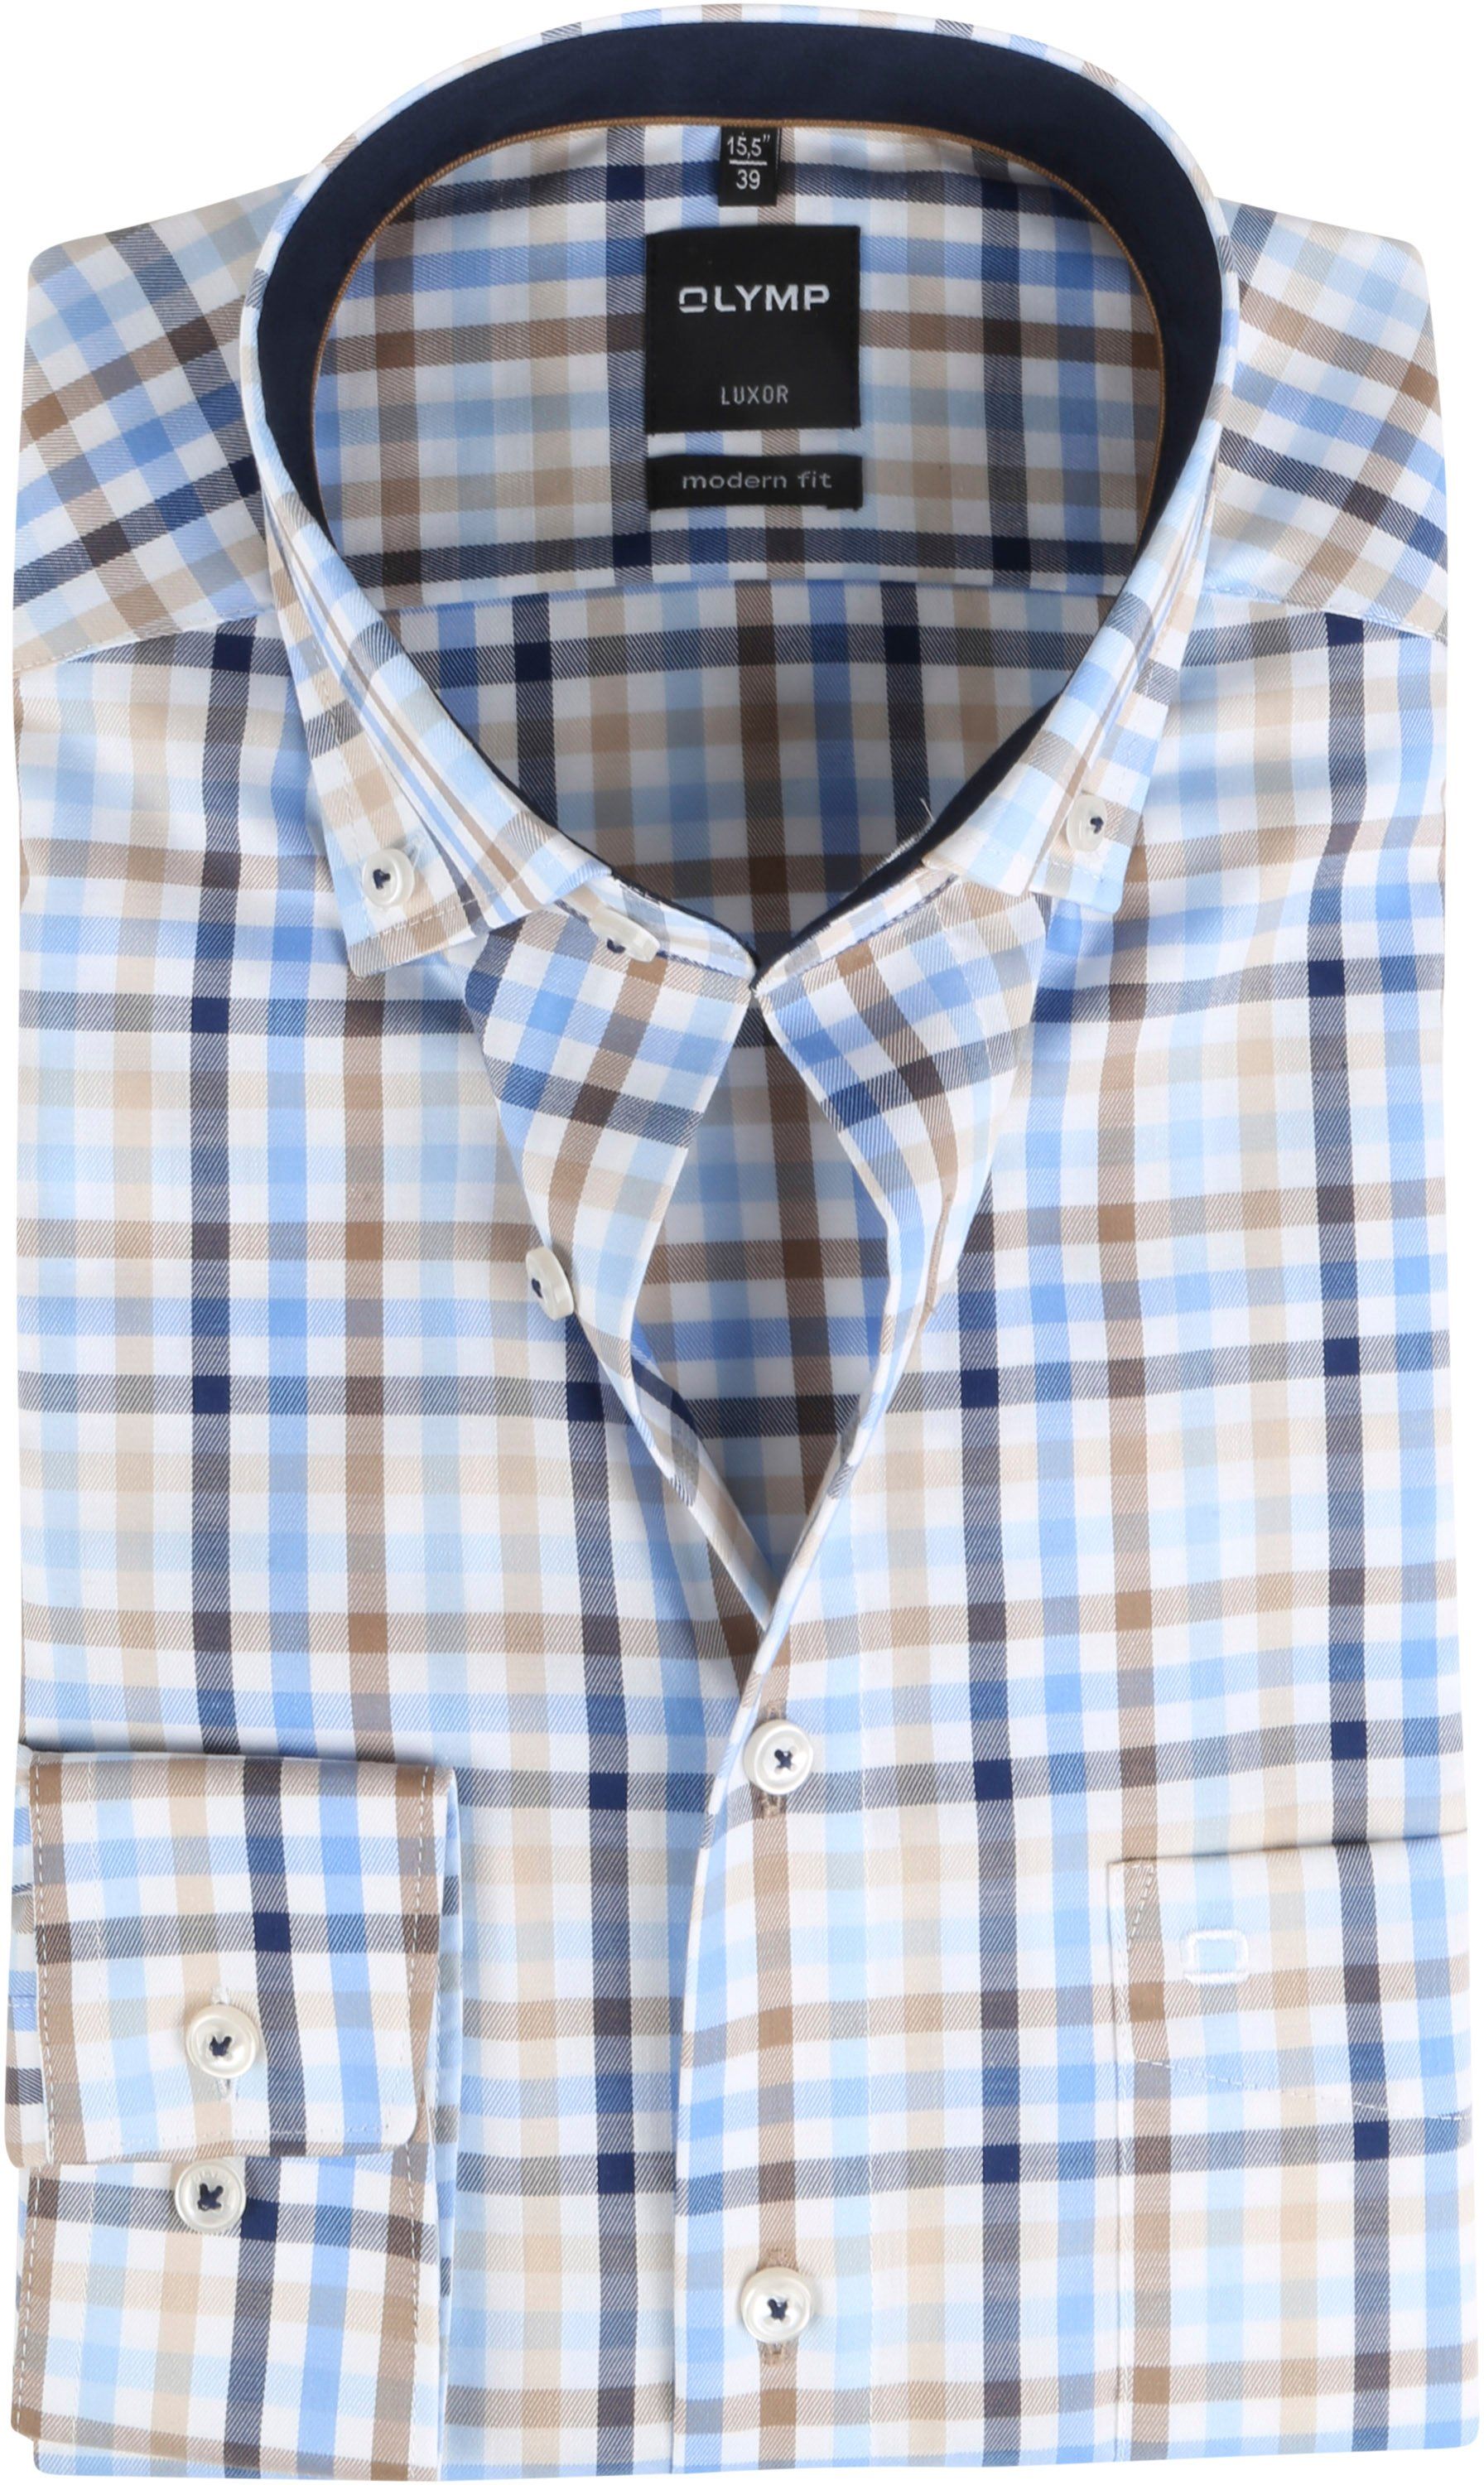 Olymp Luxor Shirt Checkered Blue size 15 1/2